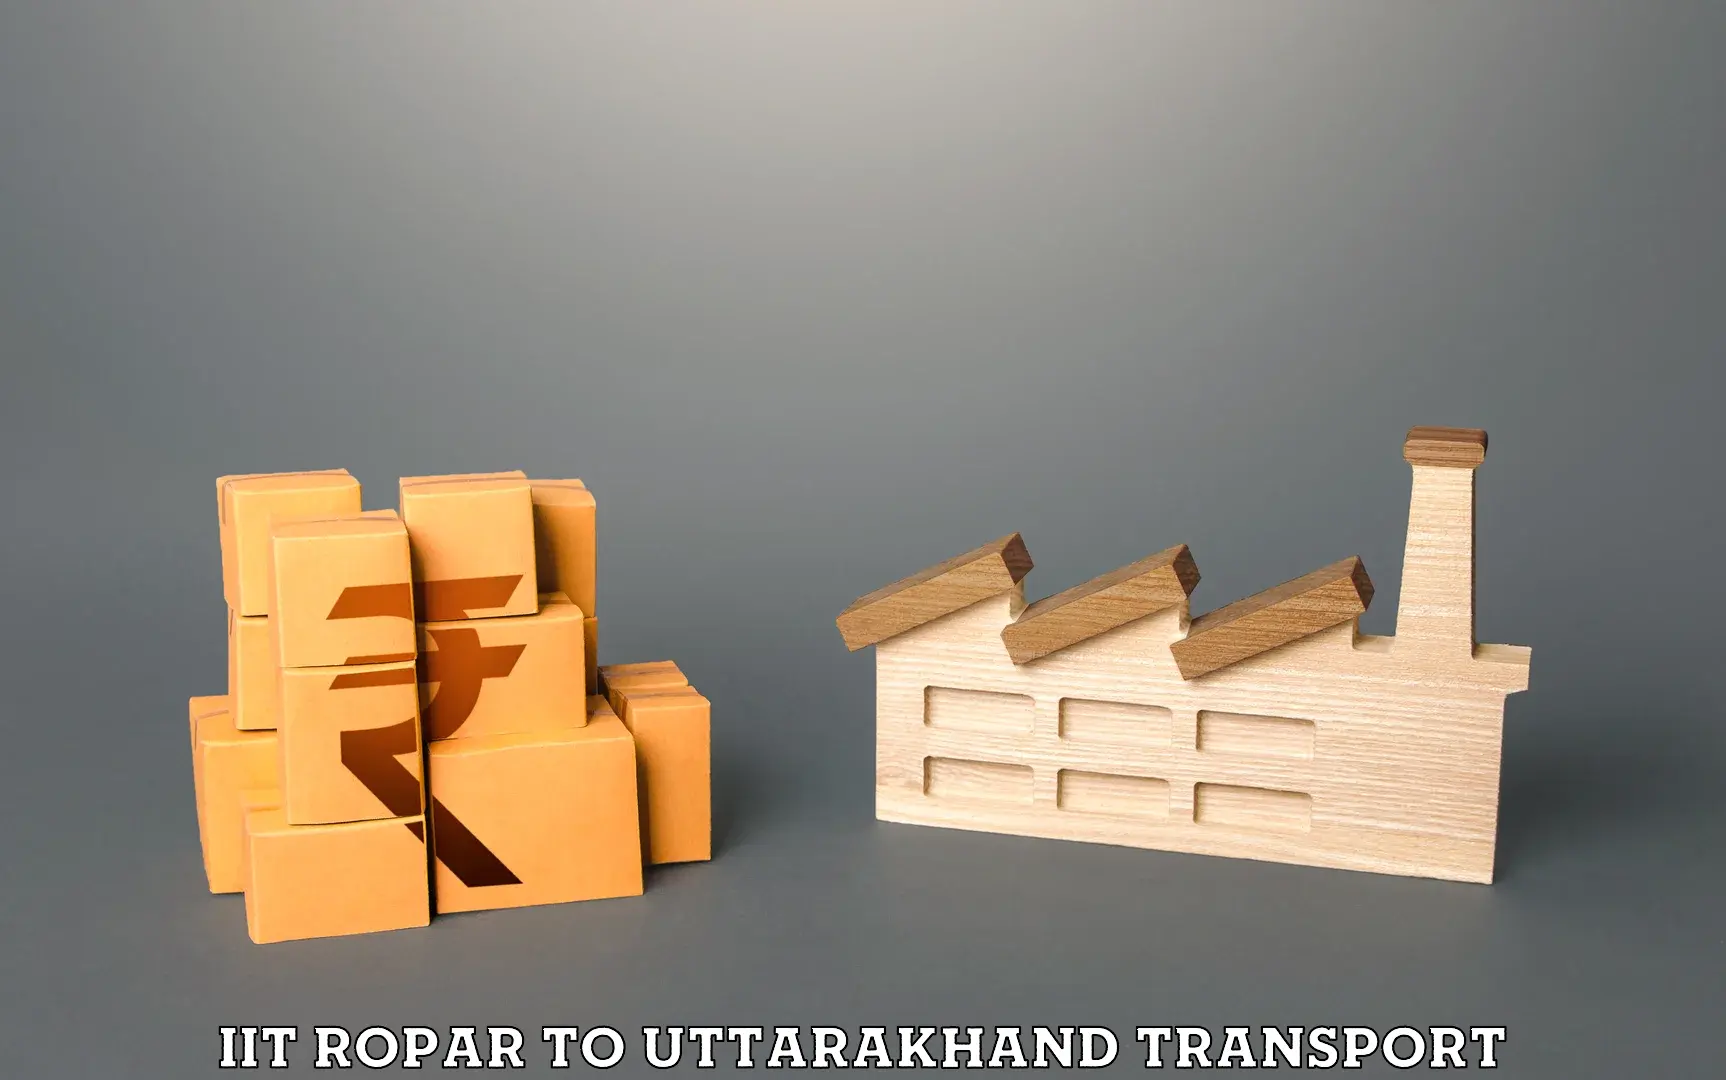 Truck transport companies in India IIT Ropar to Pithoragarh